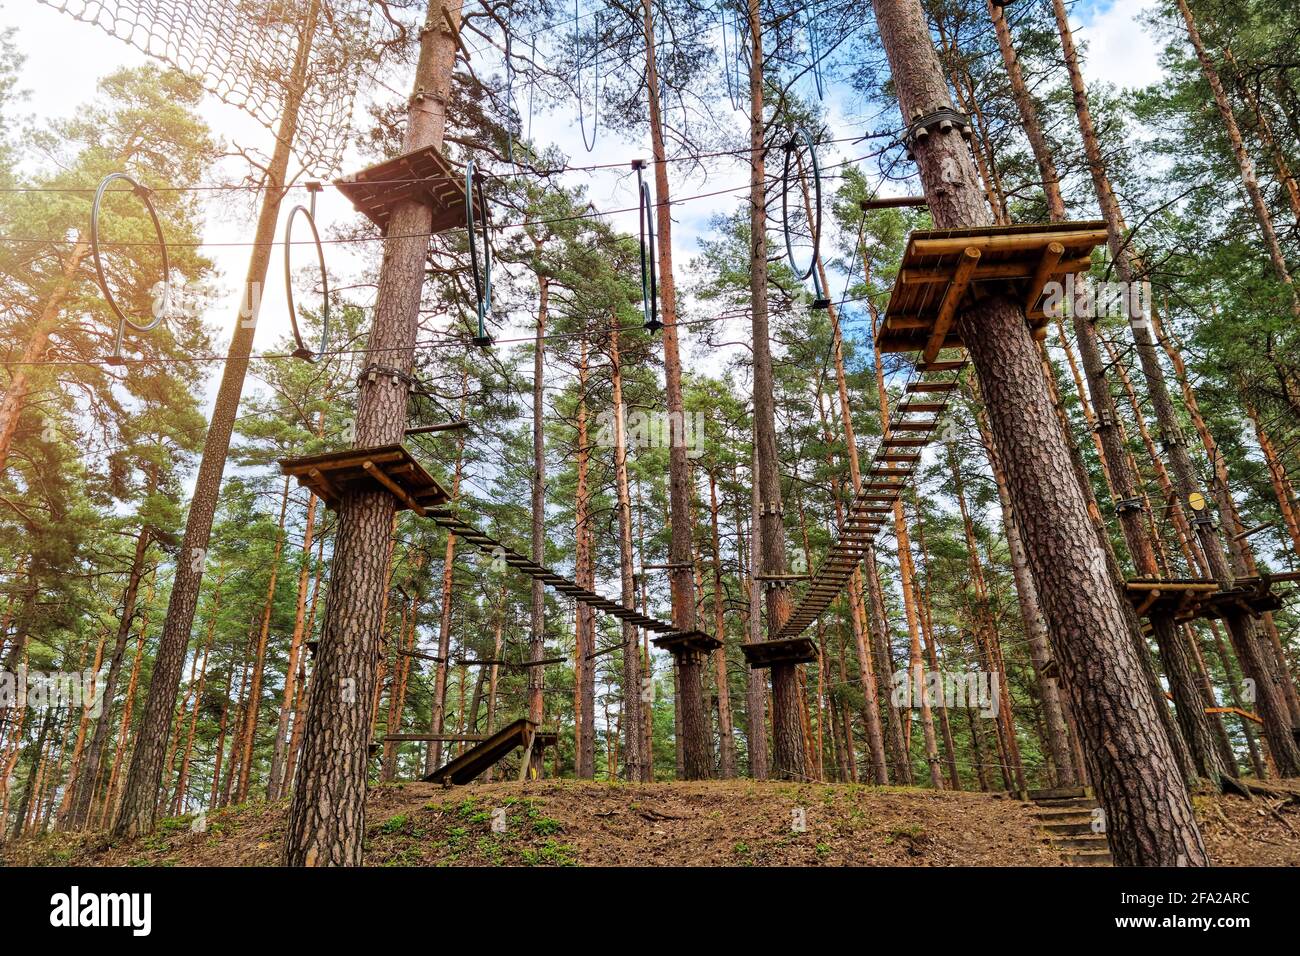 rope obstacle track high in the trees in adventure park Stock Photo